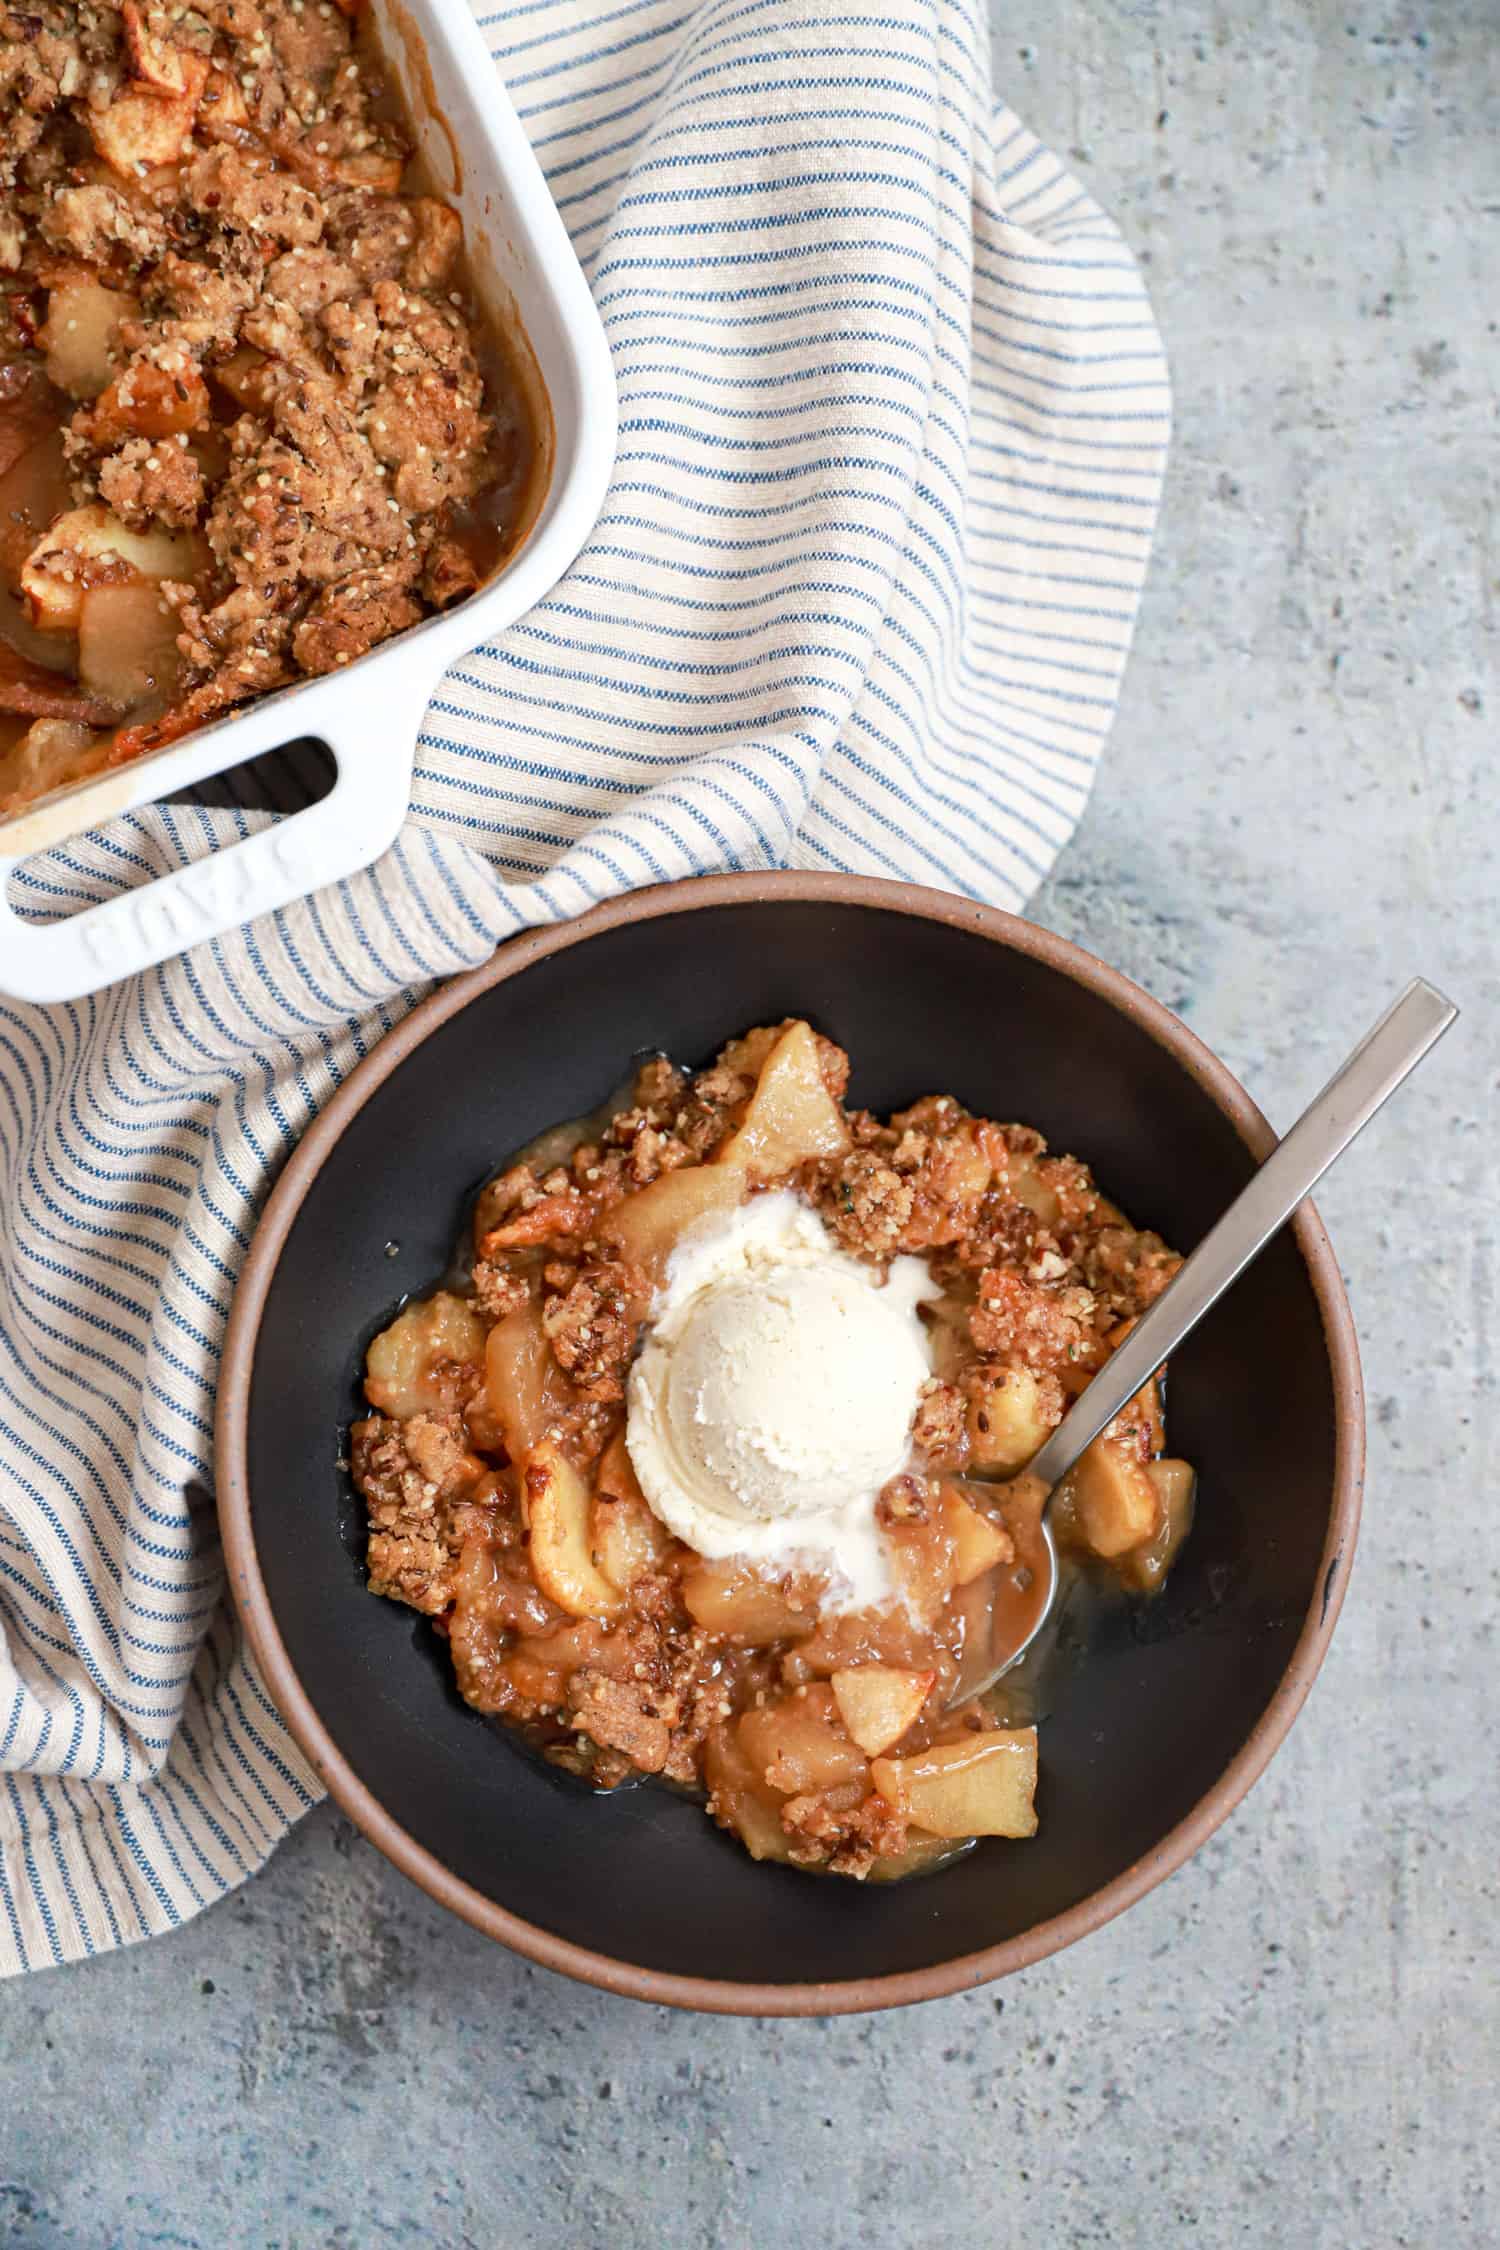 bowl of no oatmeal apple crisp with melting ice cream in the center.